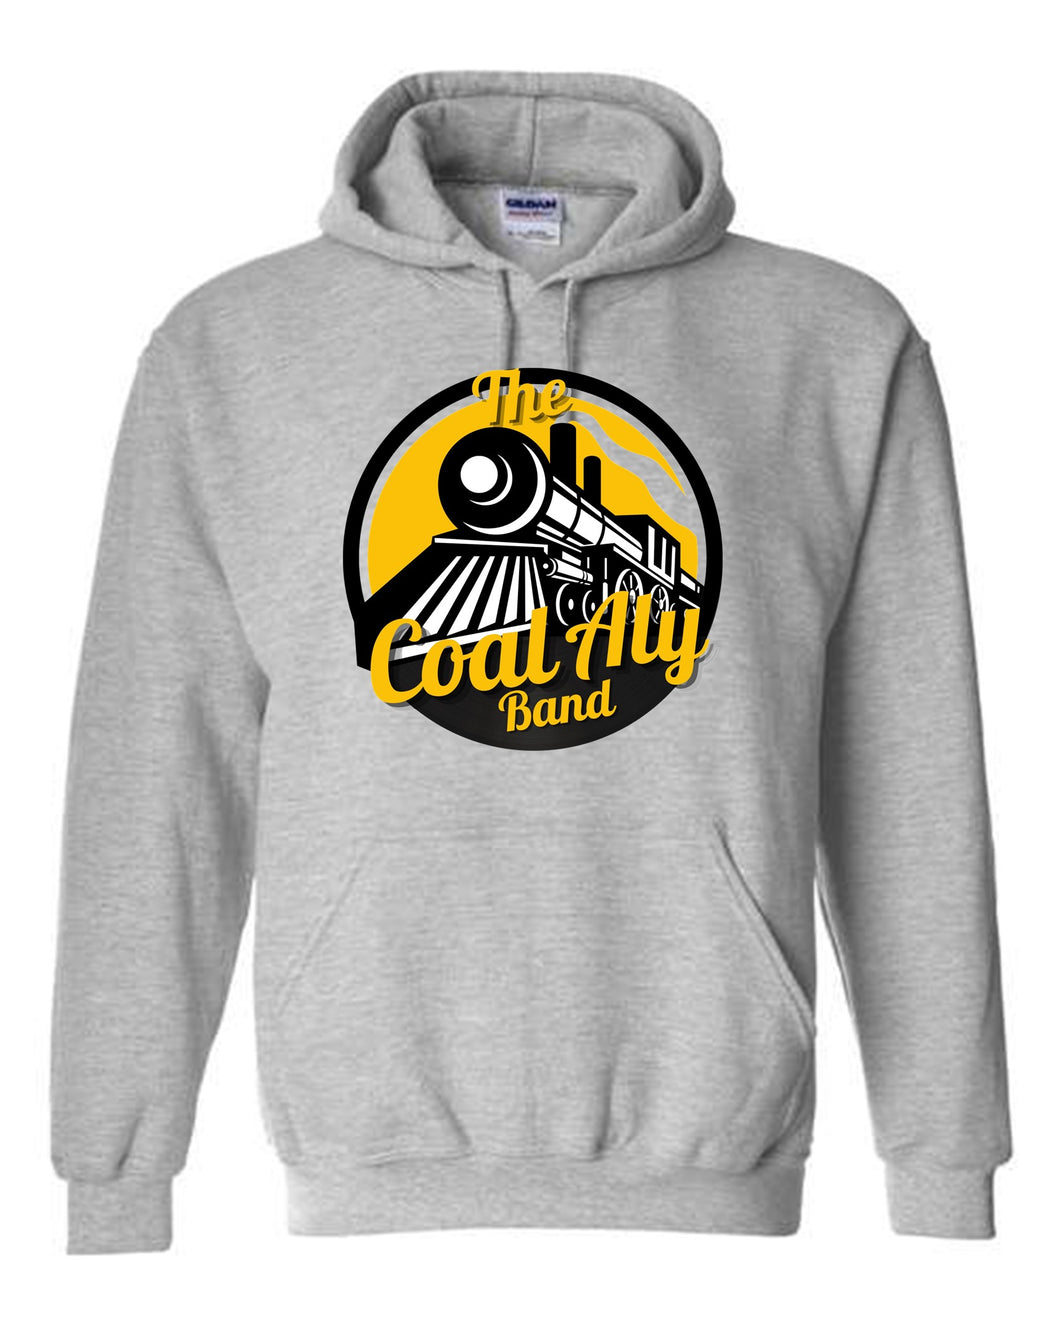 Coal Aly Band Hooded Sweatshirt (Add'l Color!)